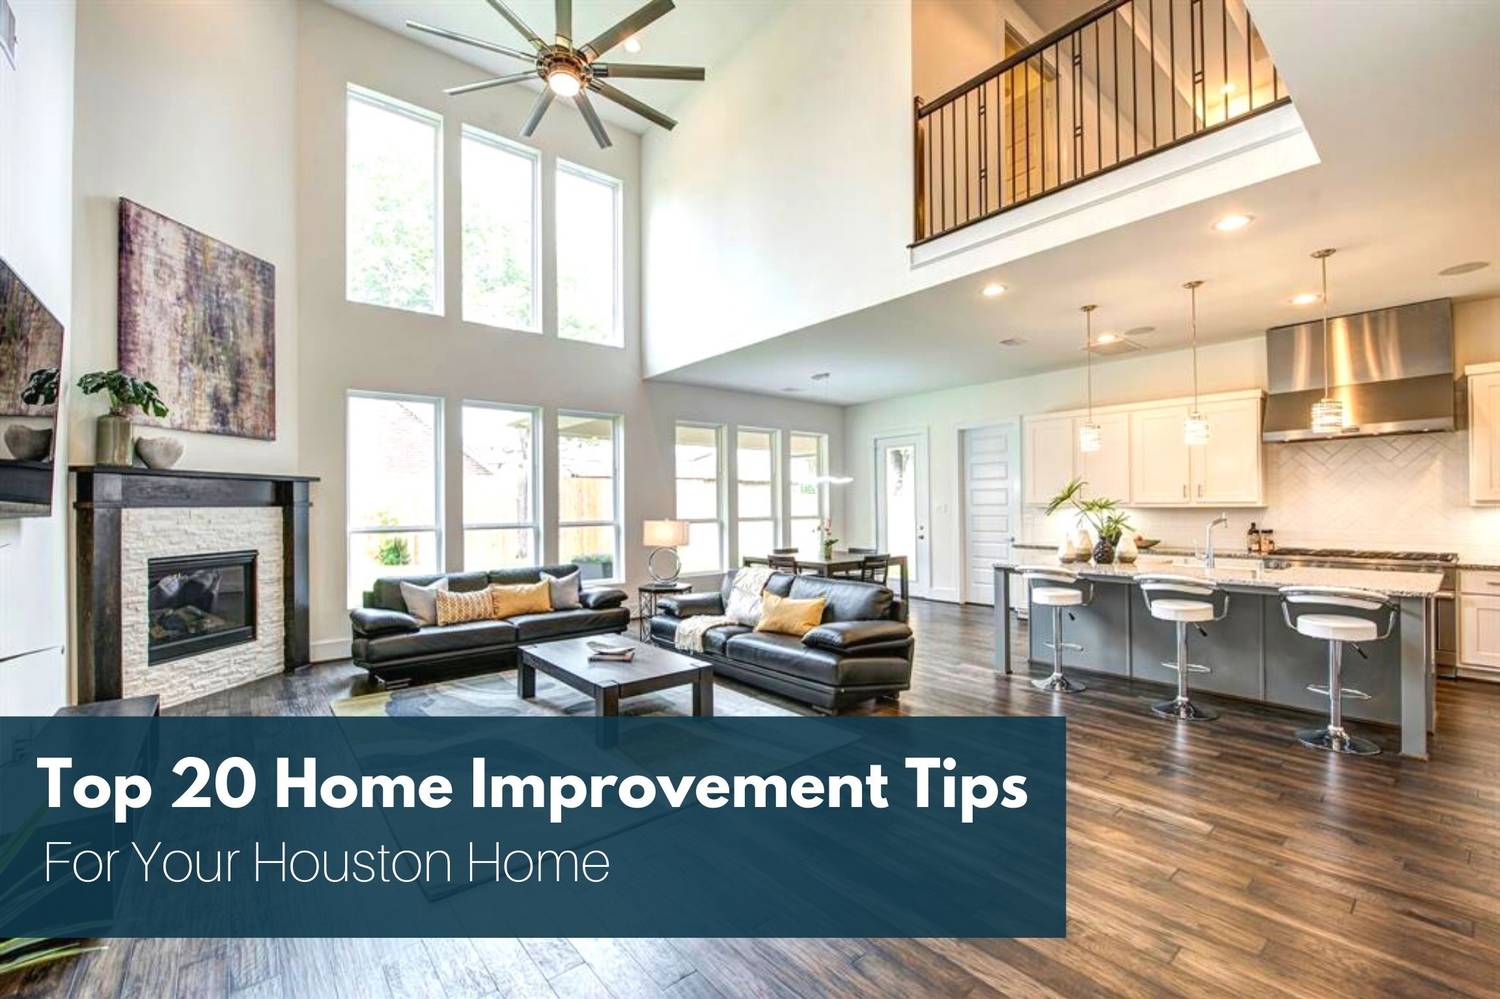 Sell My Houston House: Top 20 Home Renovations That Raise The Value Of Your Home